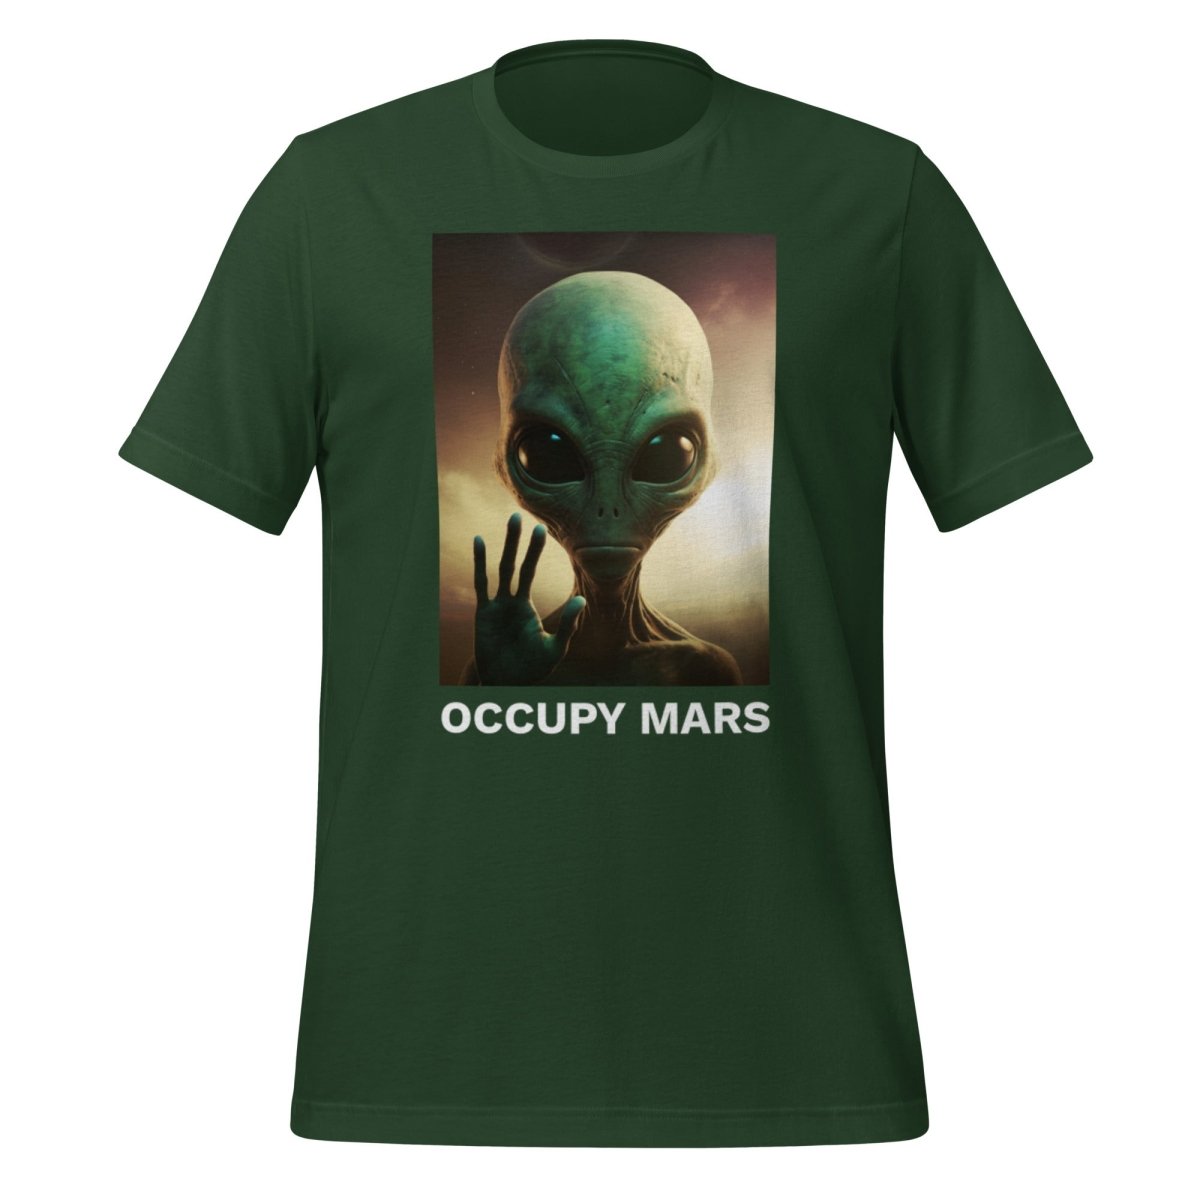 Occupy Mars T - Shirt 2 (unisex) - Forest - AI Store